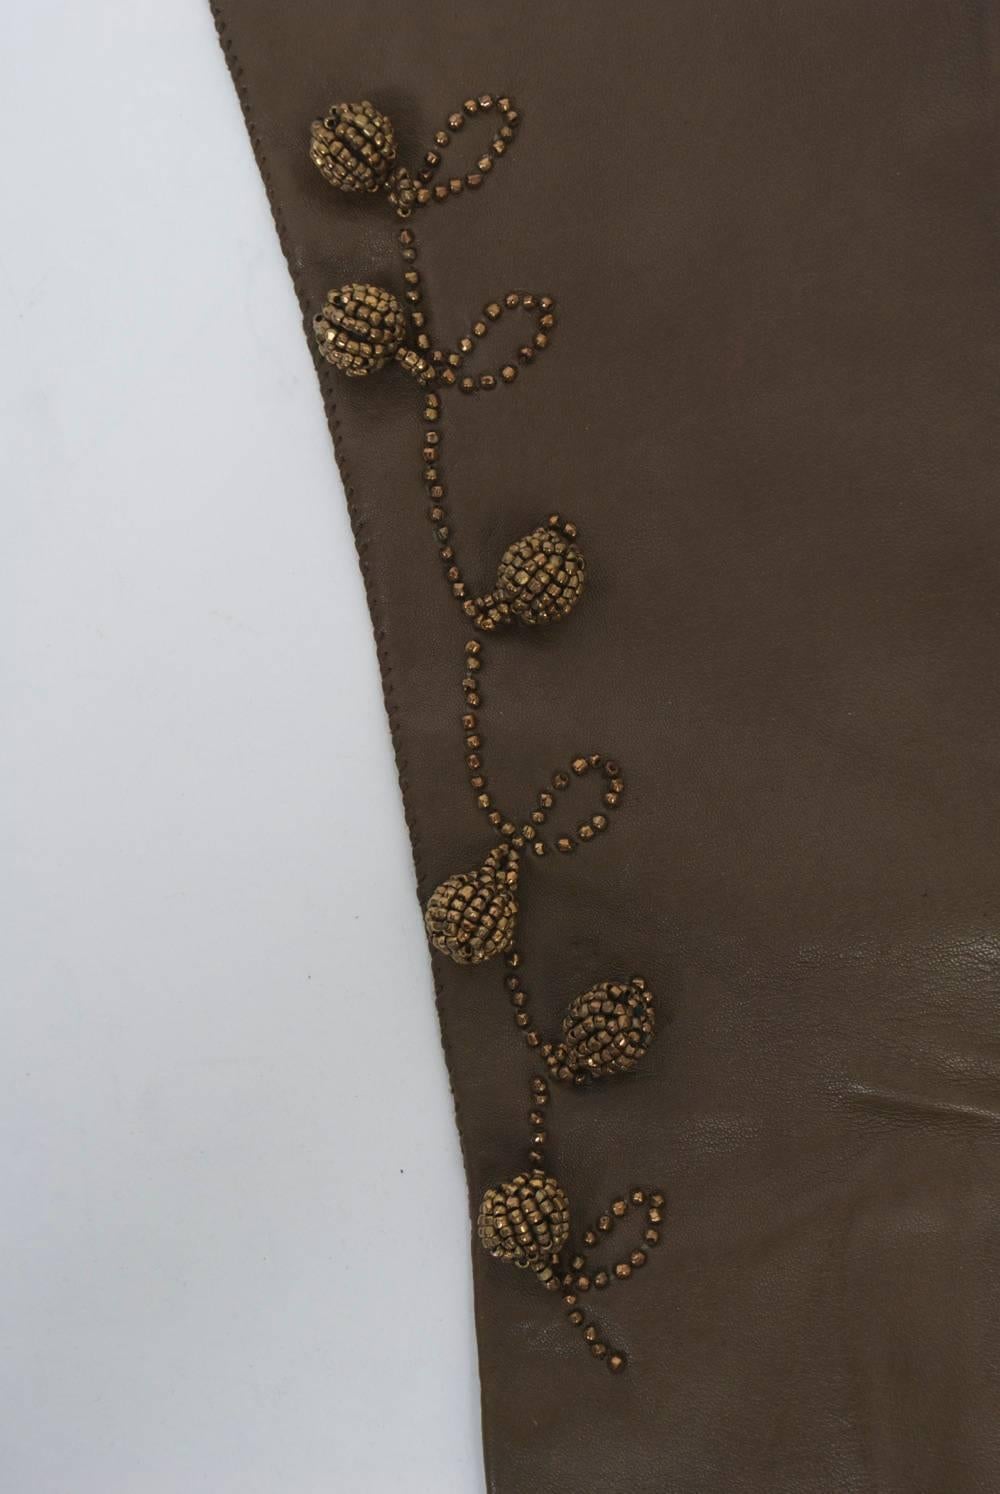 Coffee brown leather mid-length gloves with a leaf and ball design in bronze beads. Stitched fingers and whip stitched top edge. Unlined.